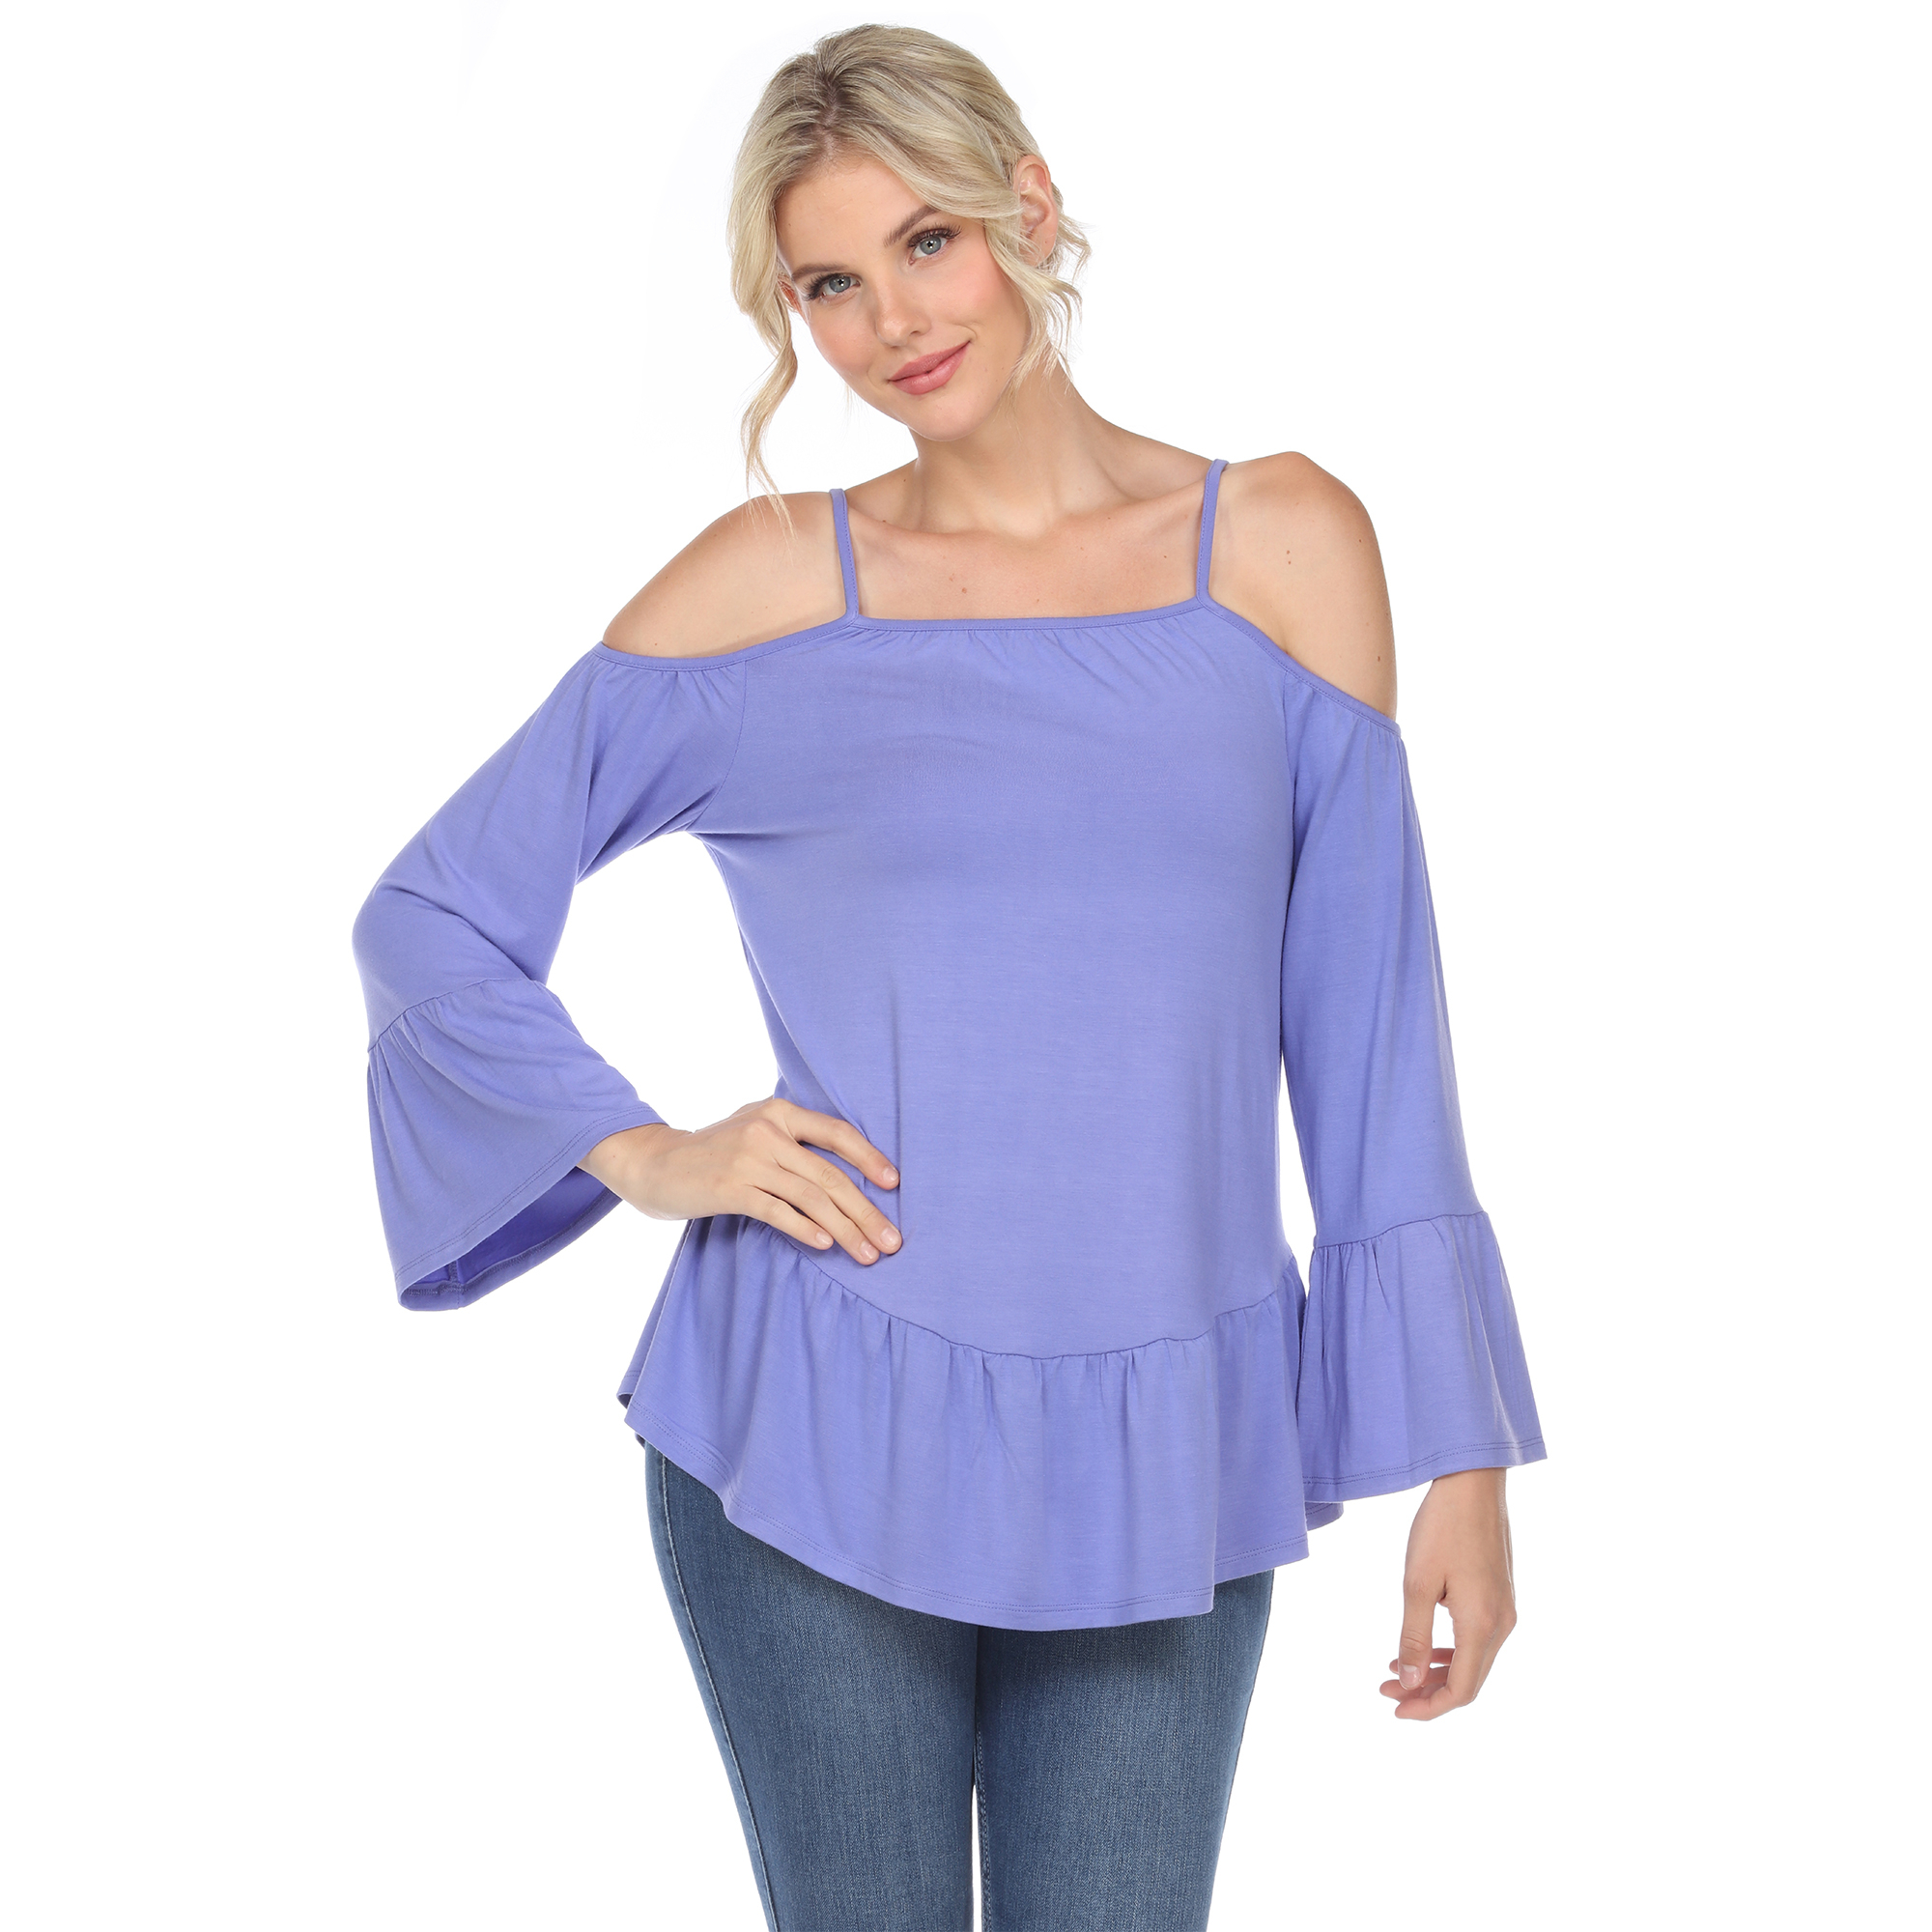 White Mark Women's Cold Shoulder Ruffle Sleeve Top - Purple, Large